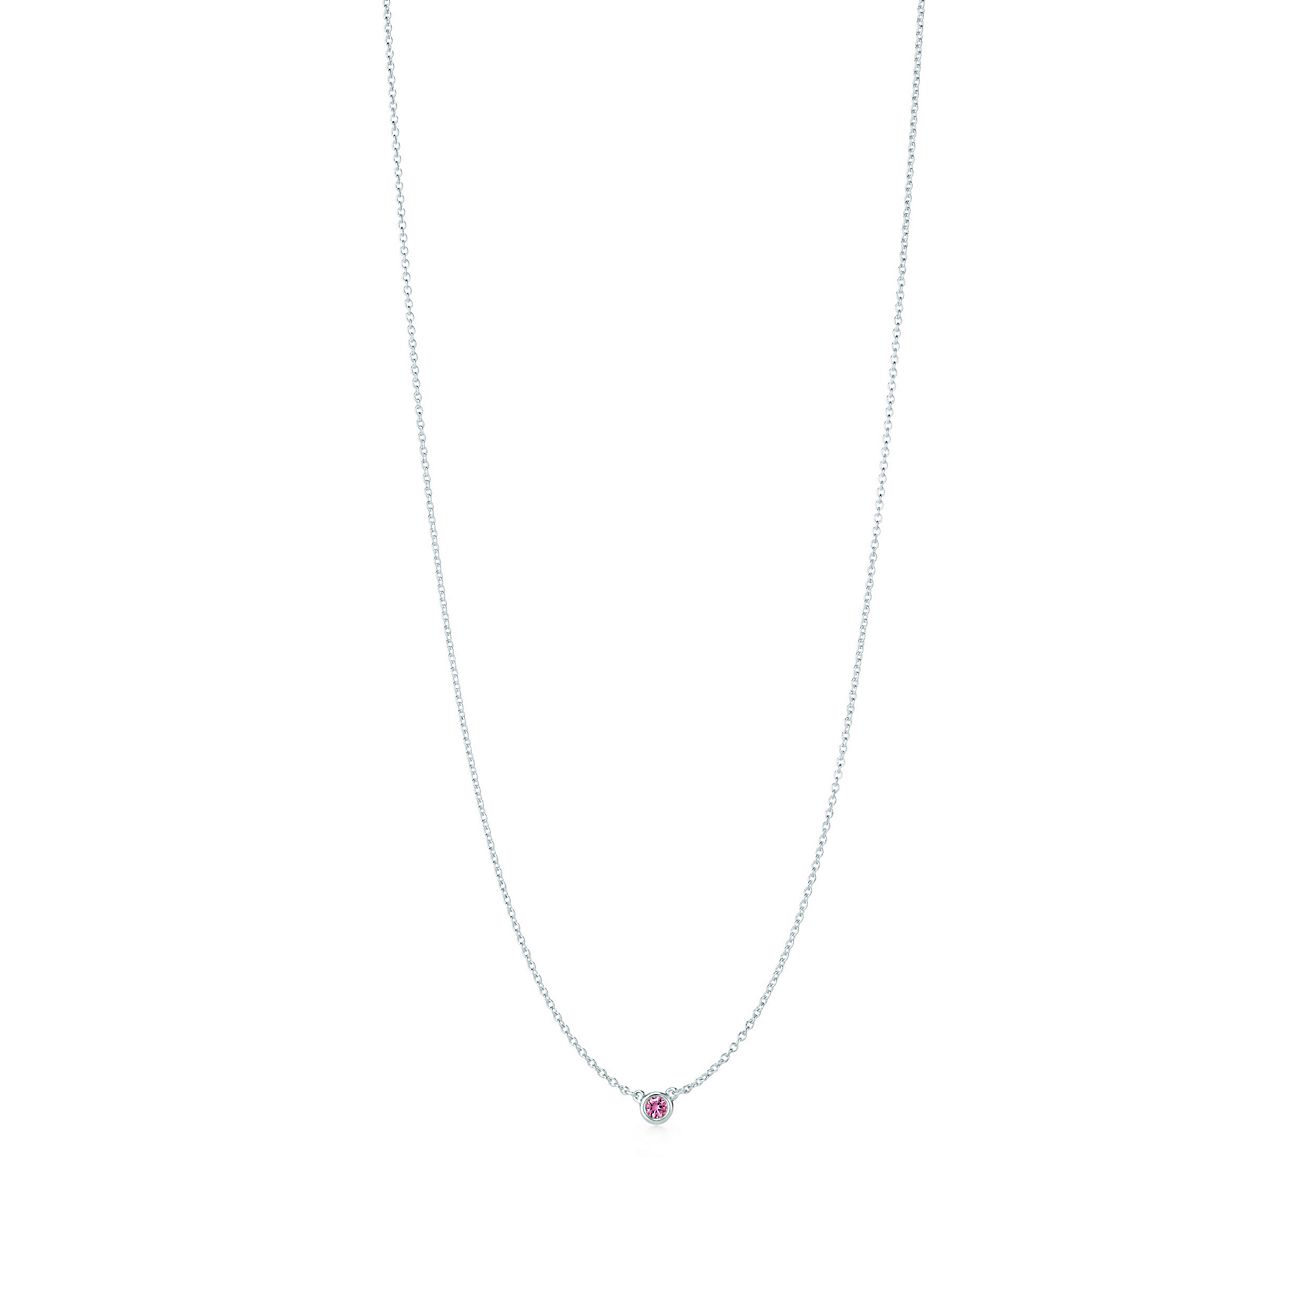 Tiffany and Co. Sapphire Diamond Platinum Soleste Pendant at 1stDibs | tiffany  pink sapphire necklace, pink sapphire necklace tiffany, tiffany pink  diamond necklace